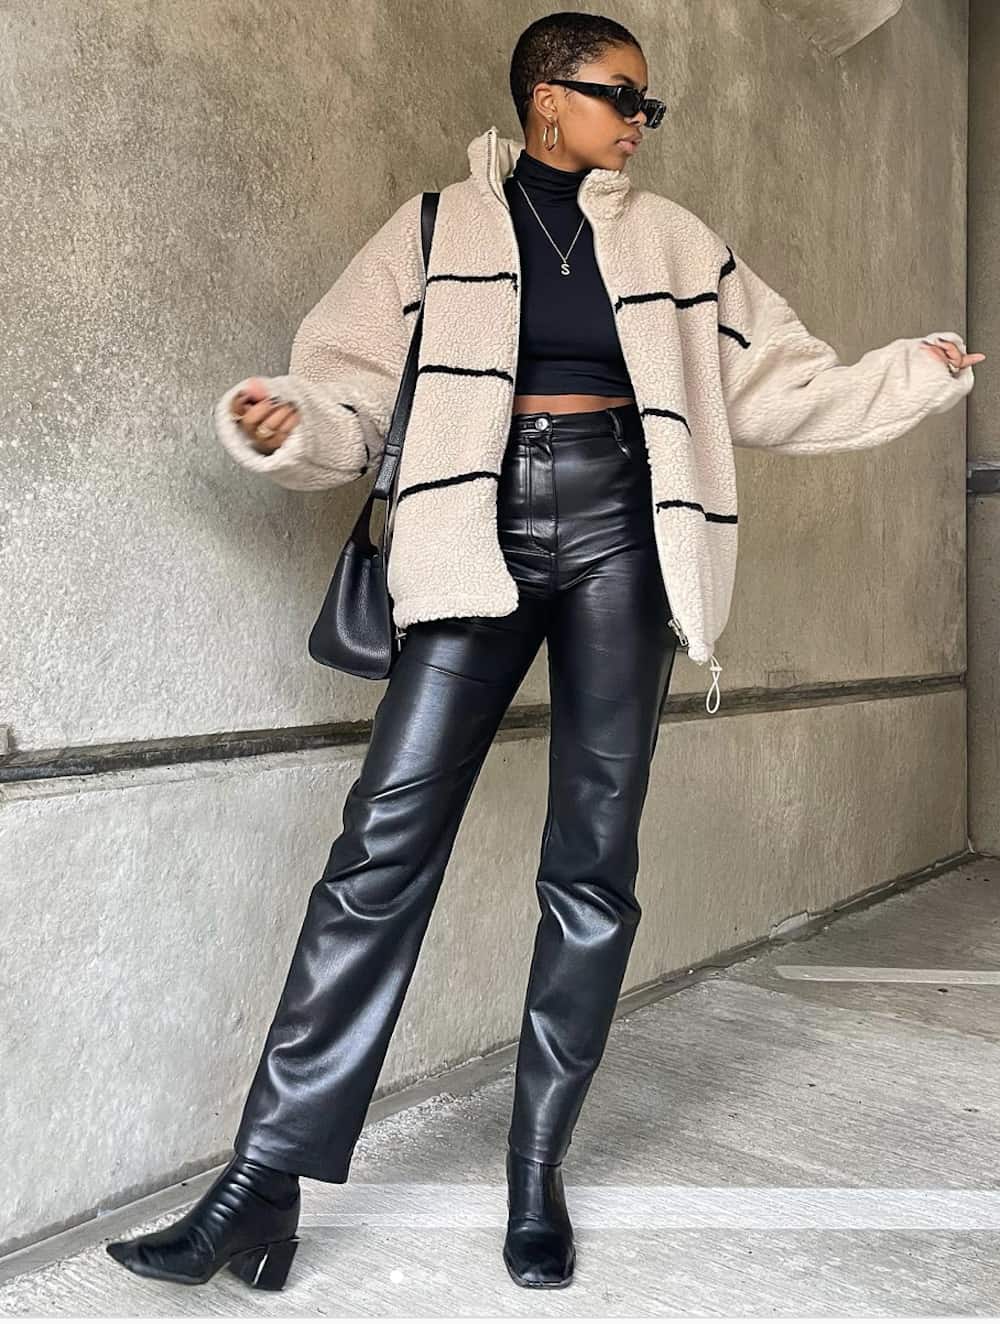 image of a black woman in a chic outfit with a sherpa jacket, black leather pants, and black leather boots